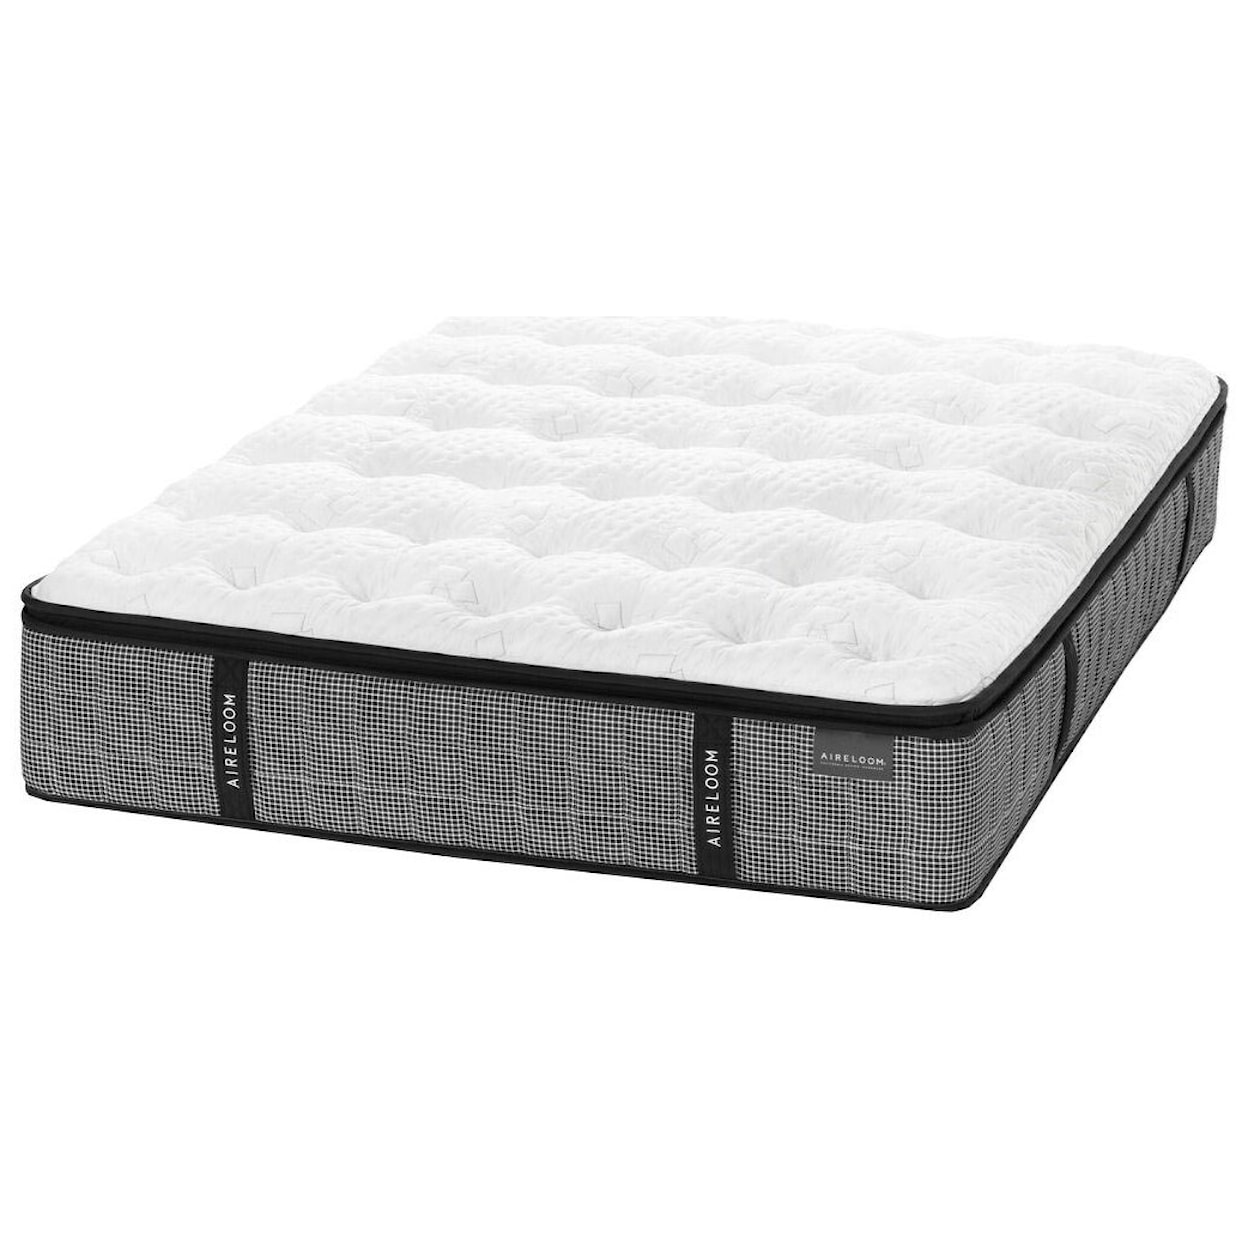 Aireloom Bedding PP Crystal Cove Firm King Luxetop™ Firm Micro Coil Mattress